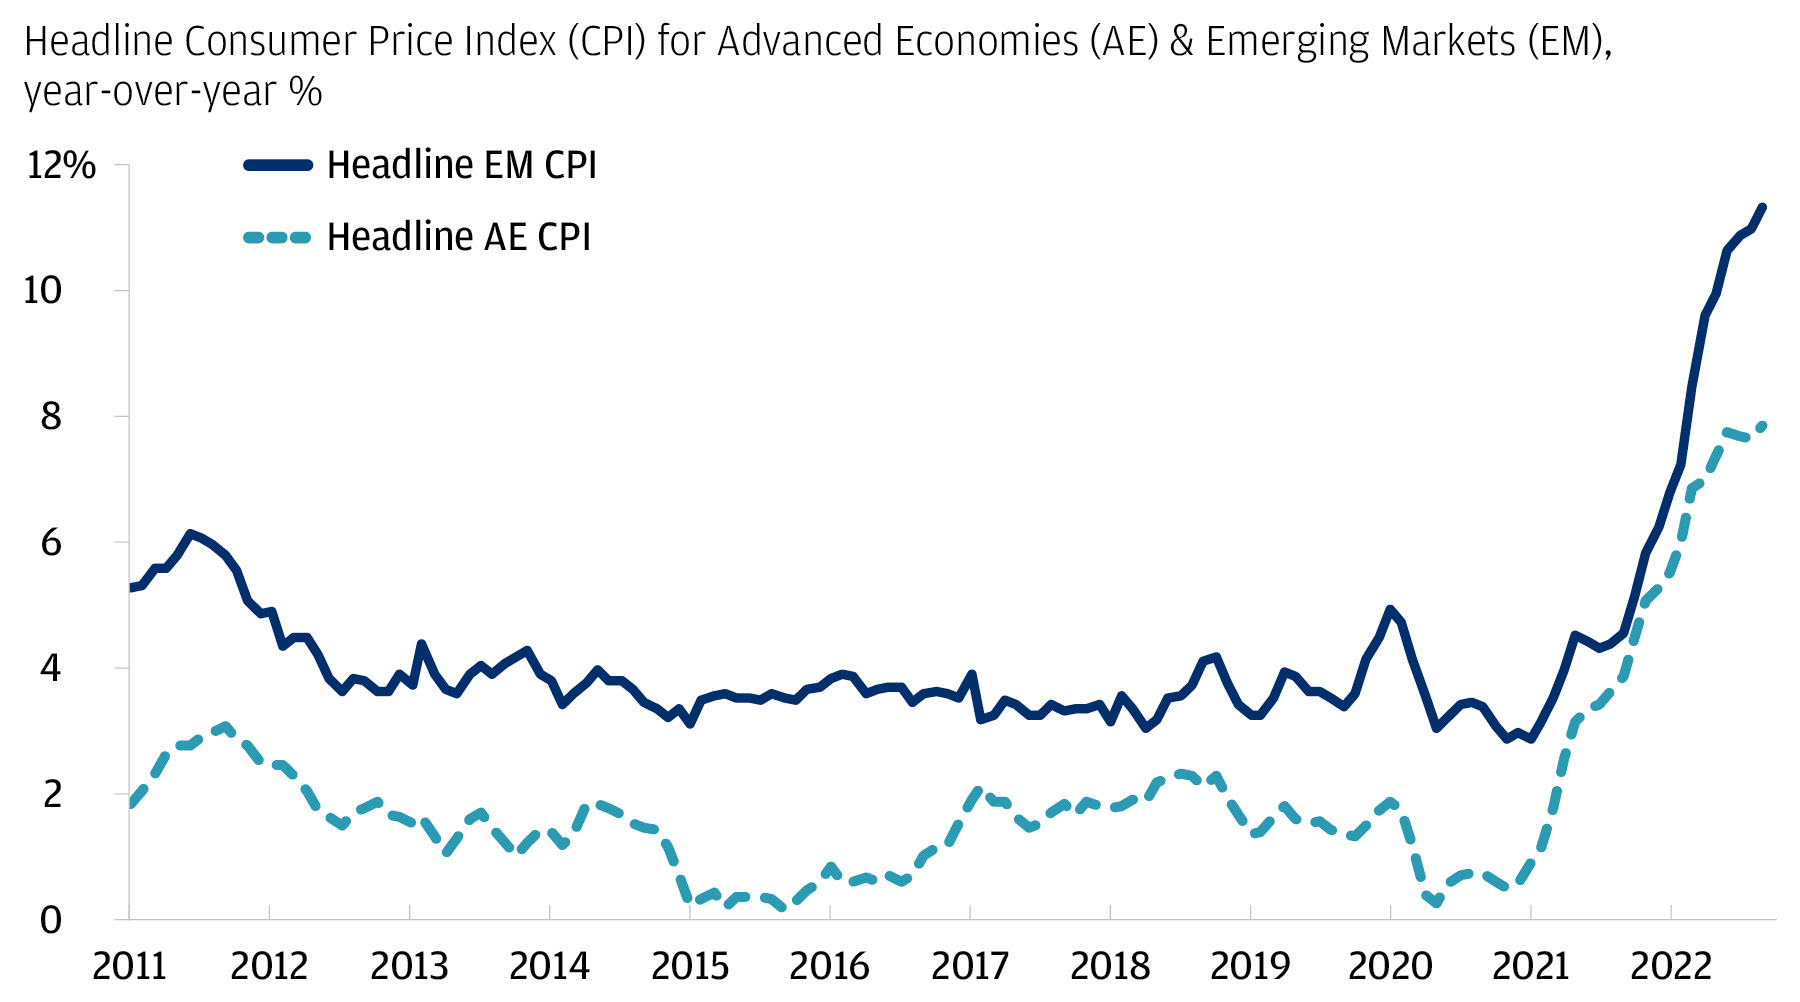 Line chart of Advanced Economies (AE) and Emerging Markets (EM) year-over-year headline consumer price inflation shown in percentage terms since 2011 through September 2022. It shows sizable increases beginning in 2021, with both AE and EM headline CPI most recently at the highest levels observed over the time period shown.